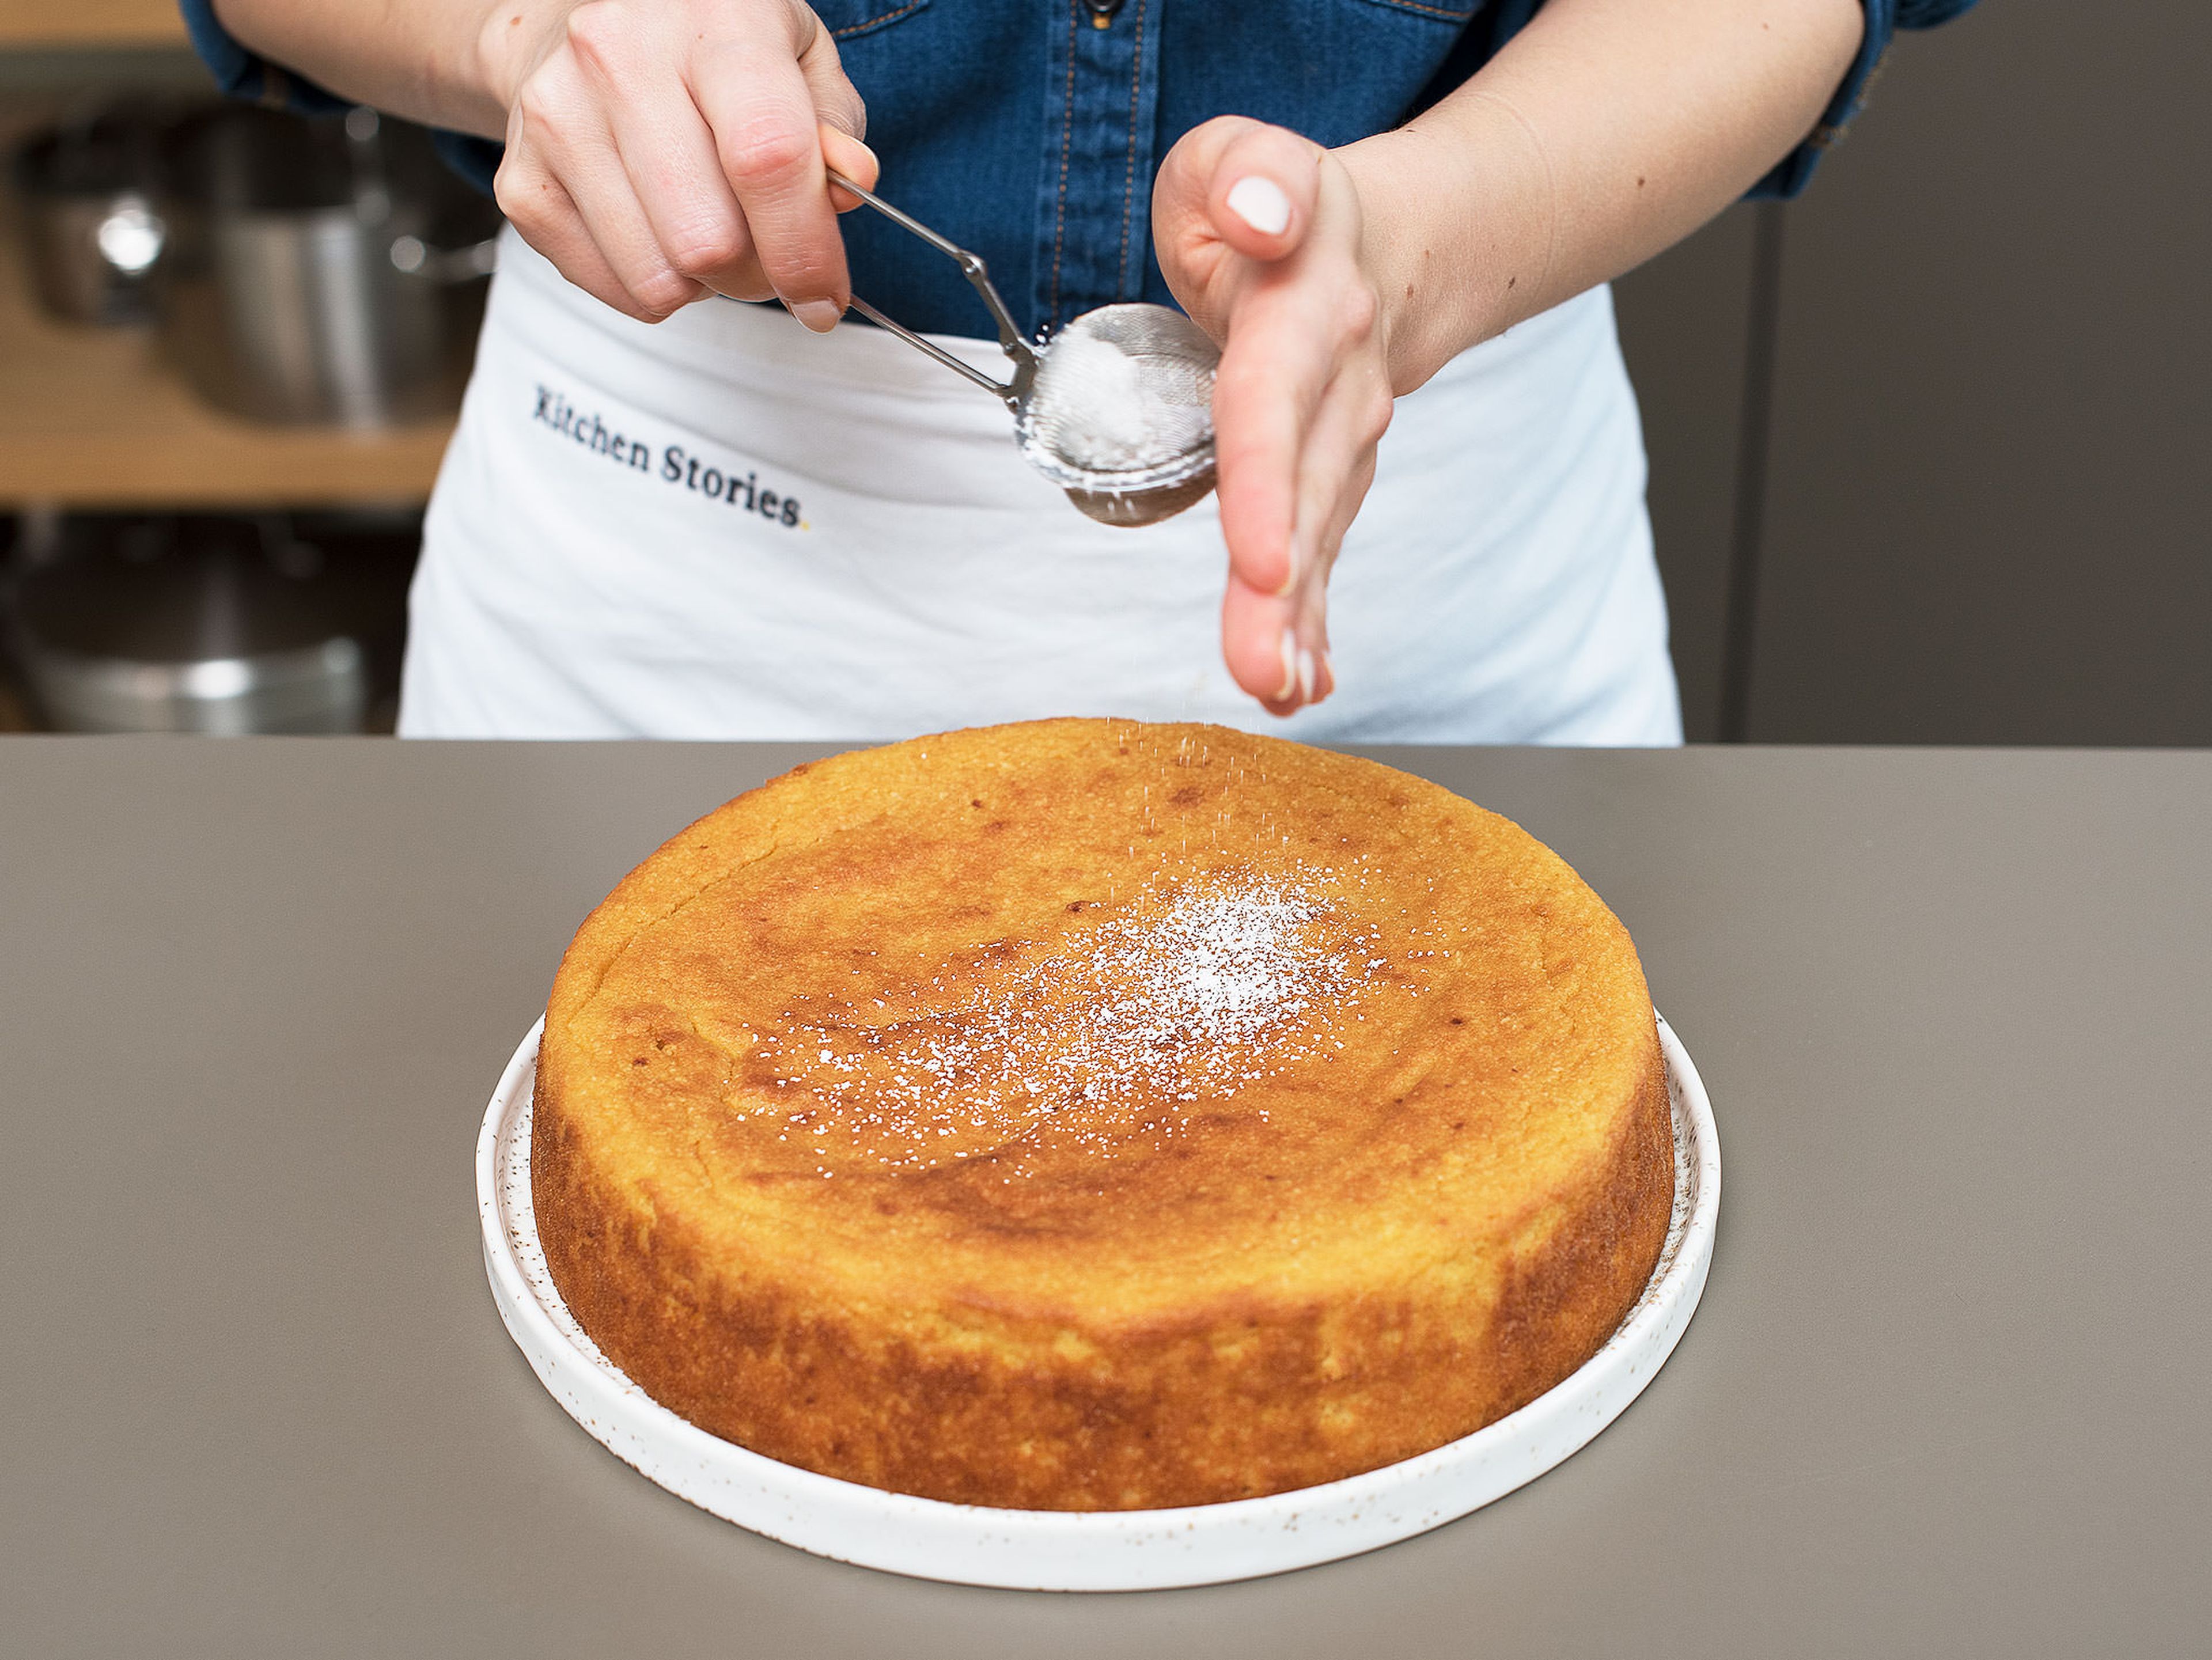 Remove cake from oven and place on a wire rack to cool before turning cake out of pan. Dust with confectioner’s sugar before serving and enjoy!